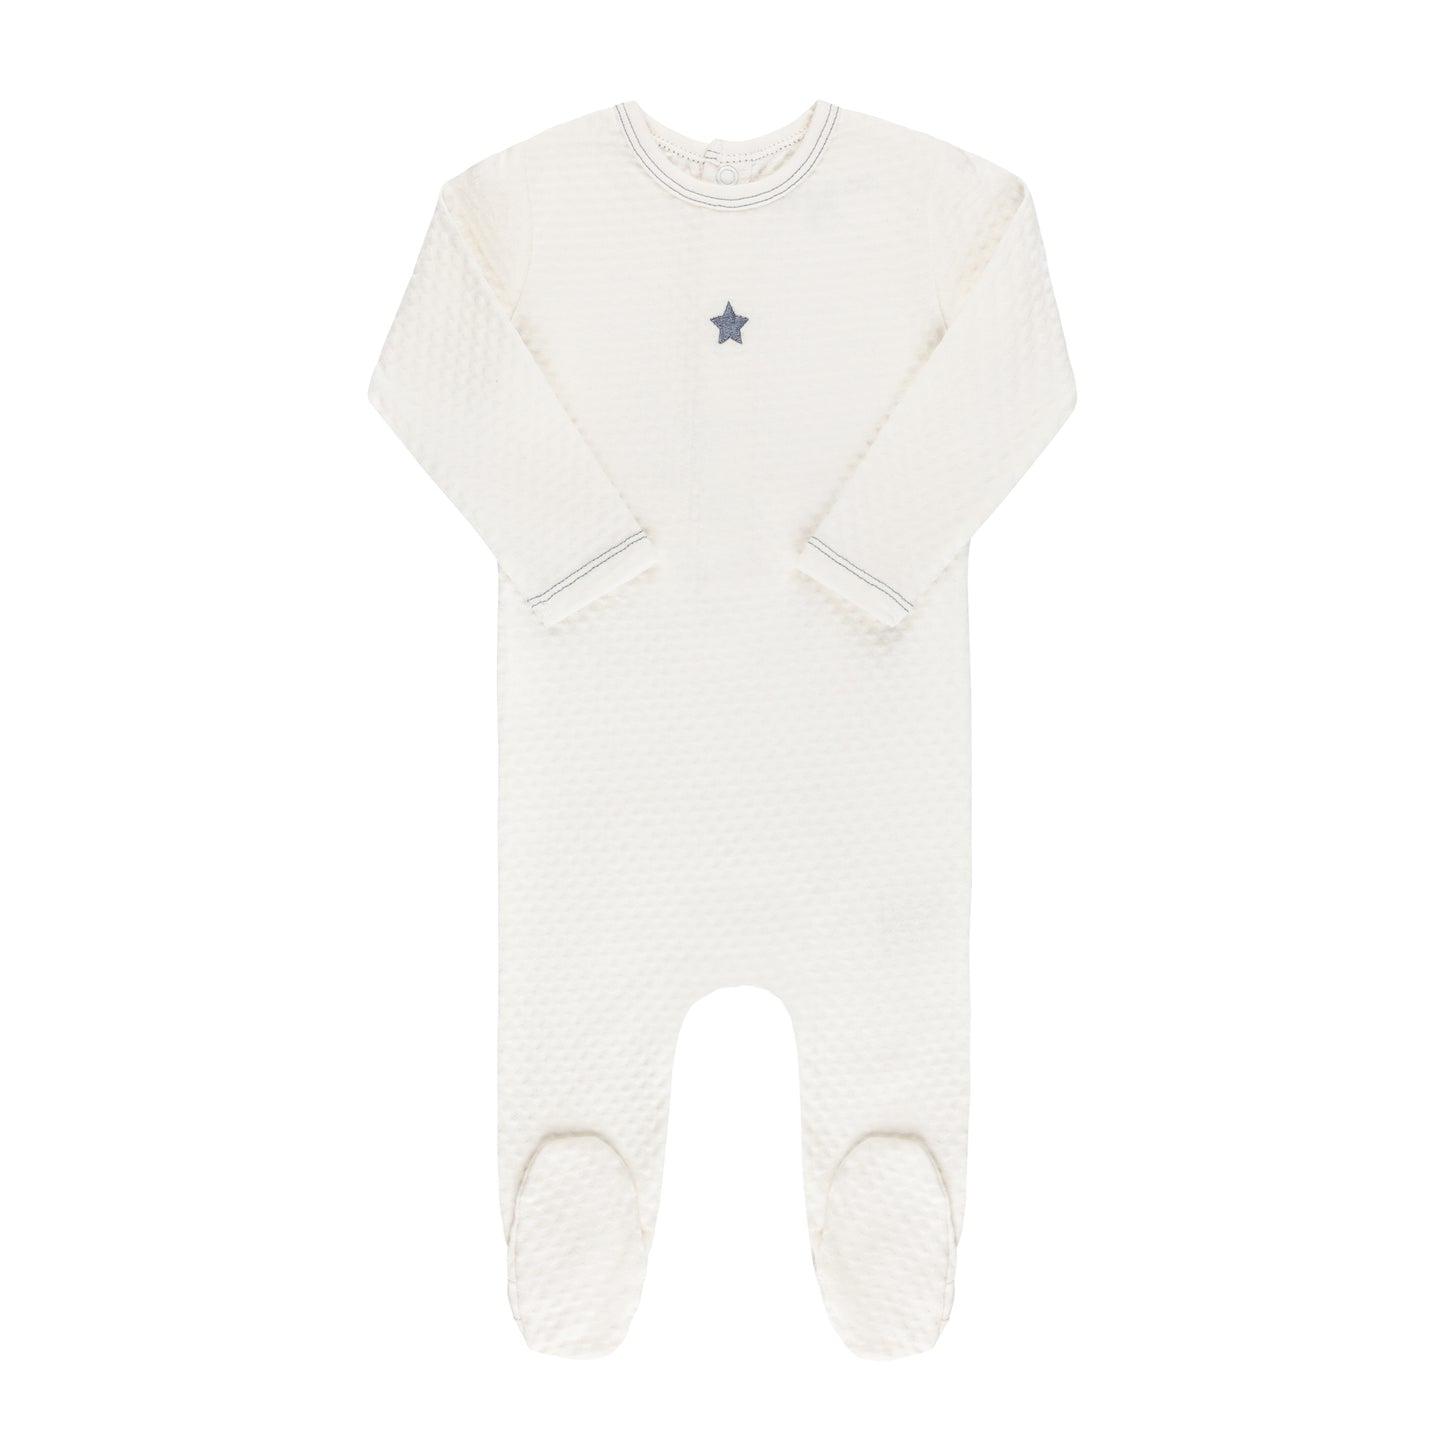 ELY'S & CO. IVORY EMBROIDERED STAR FOOTIE